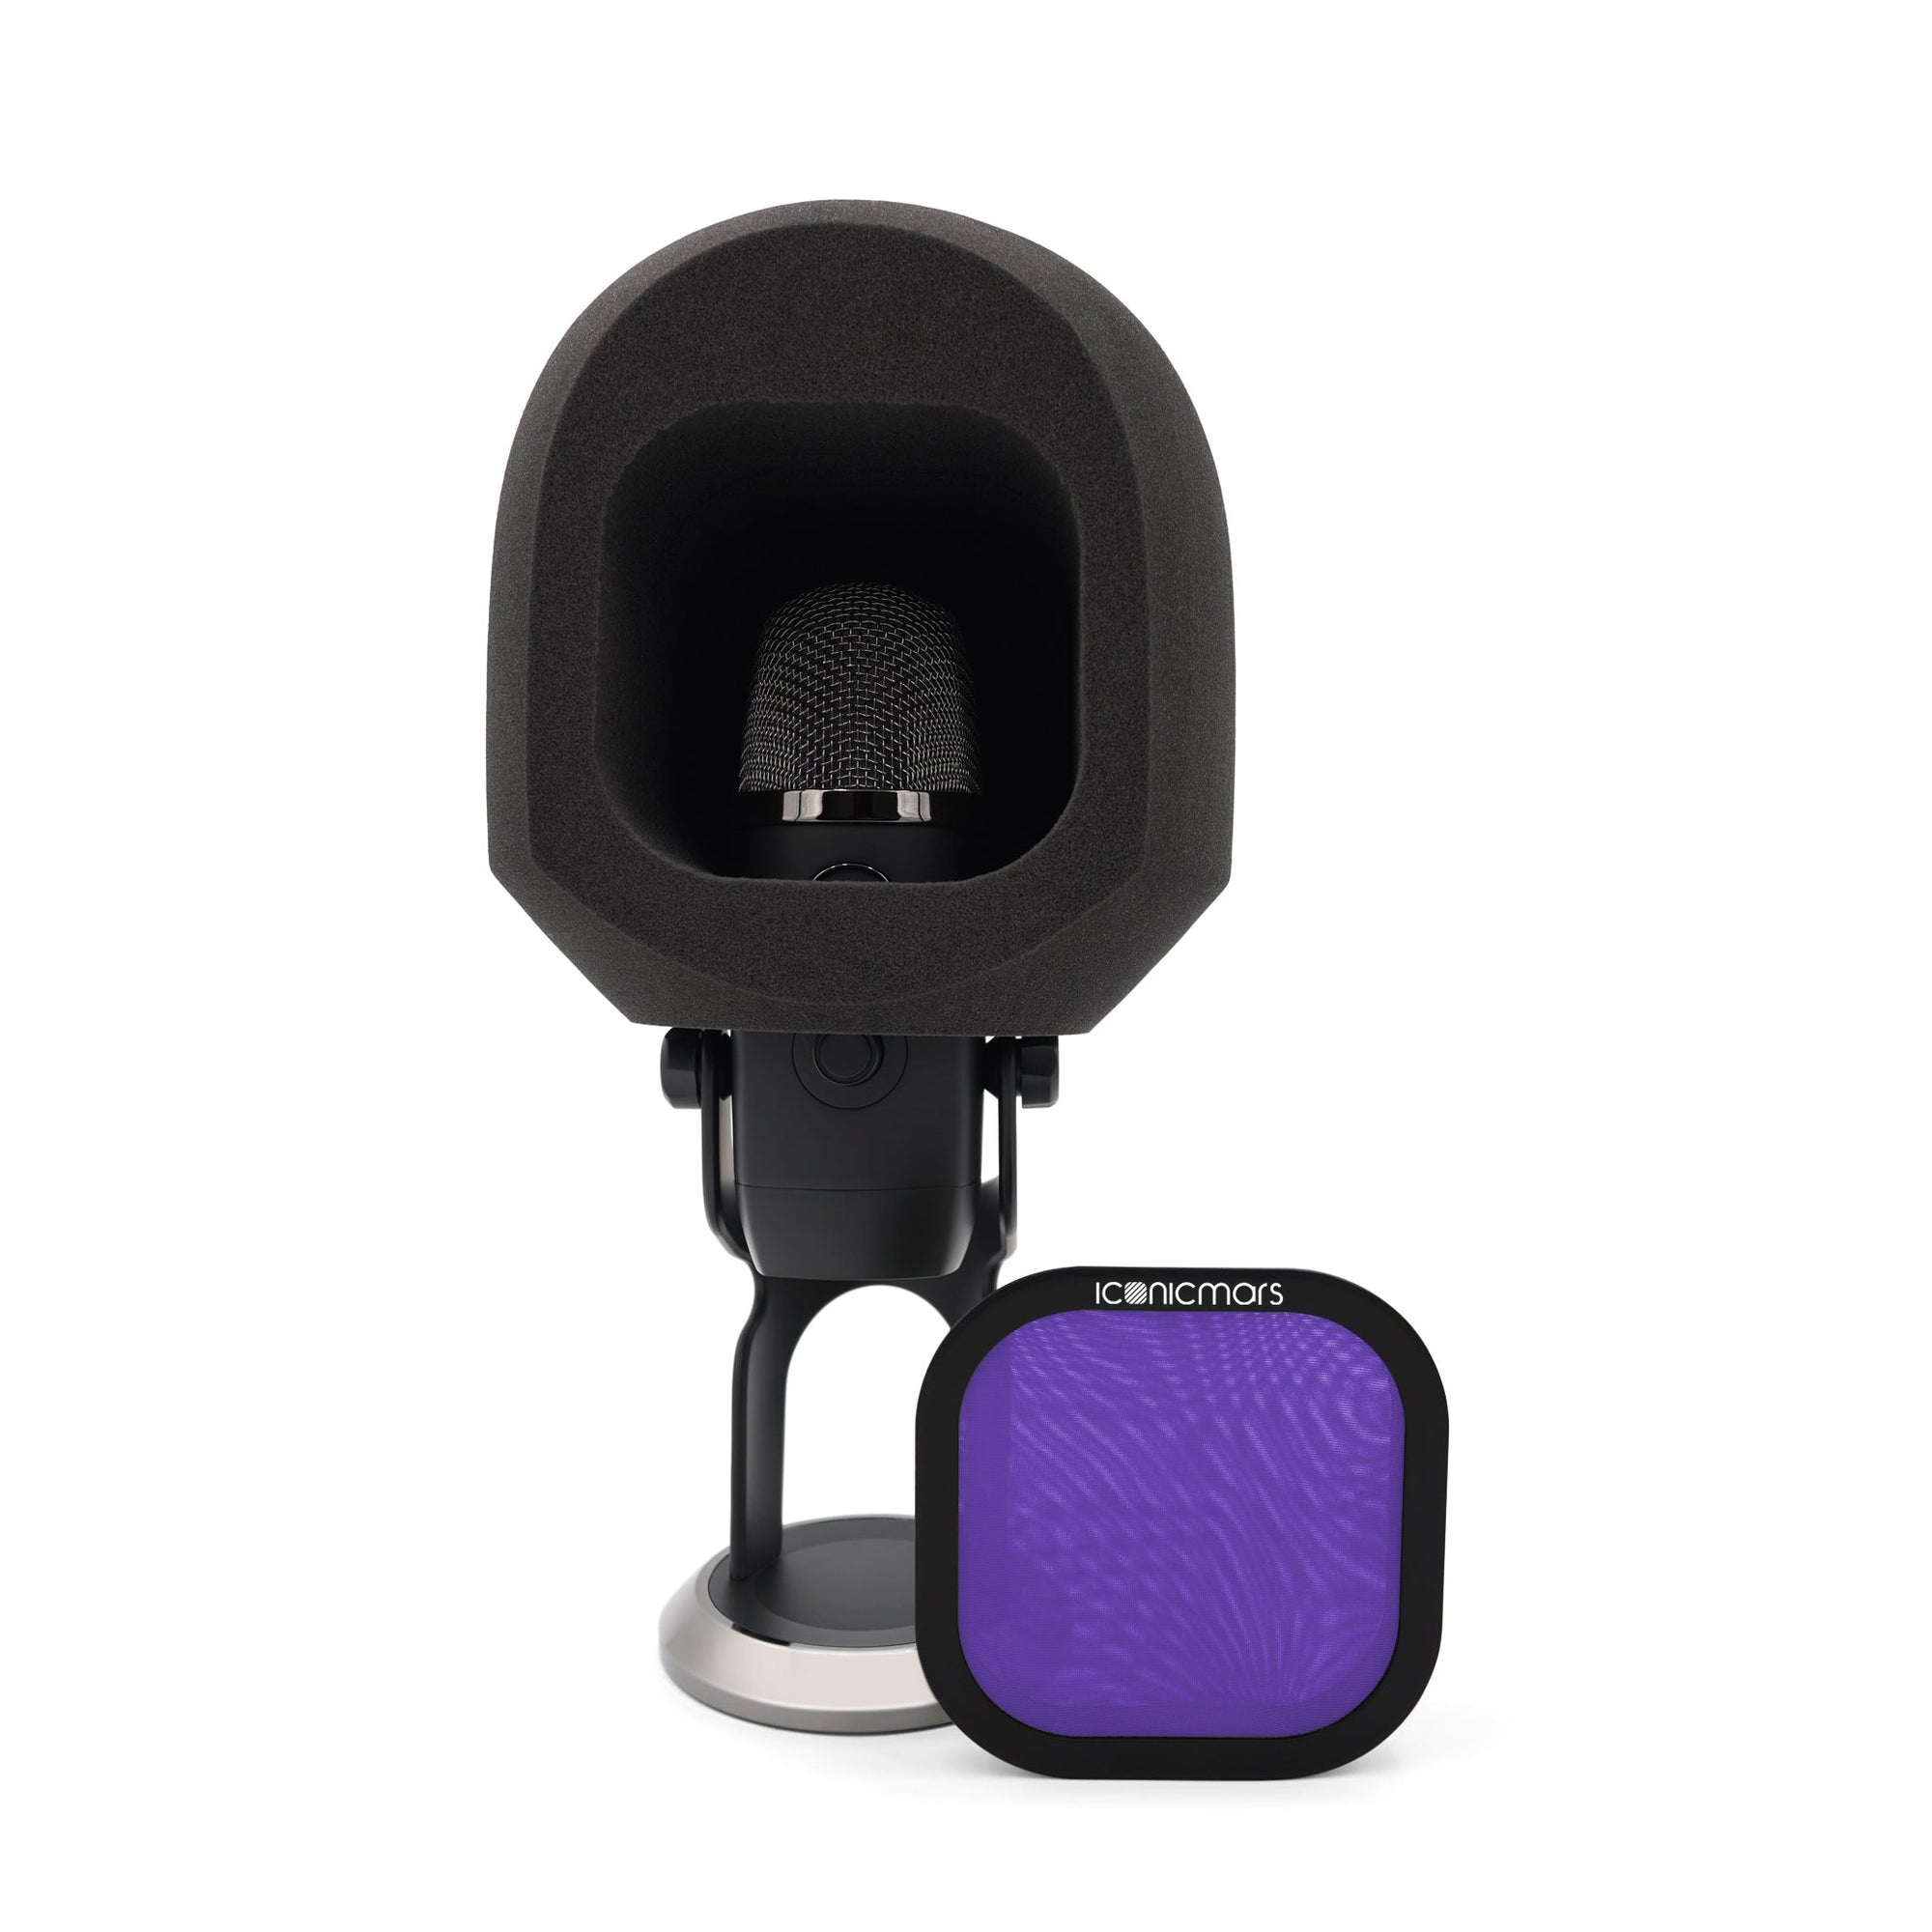 The Comet X Eye ball like isolation booth with pop filter showing microphone acoustic isolation chamber  -- Midnight Purple